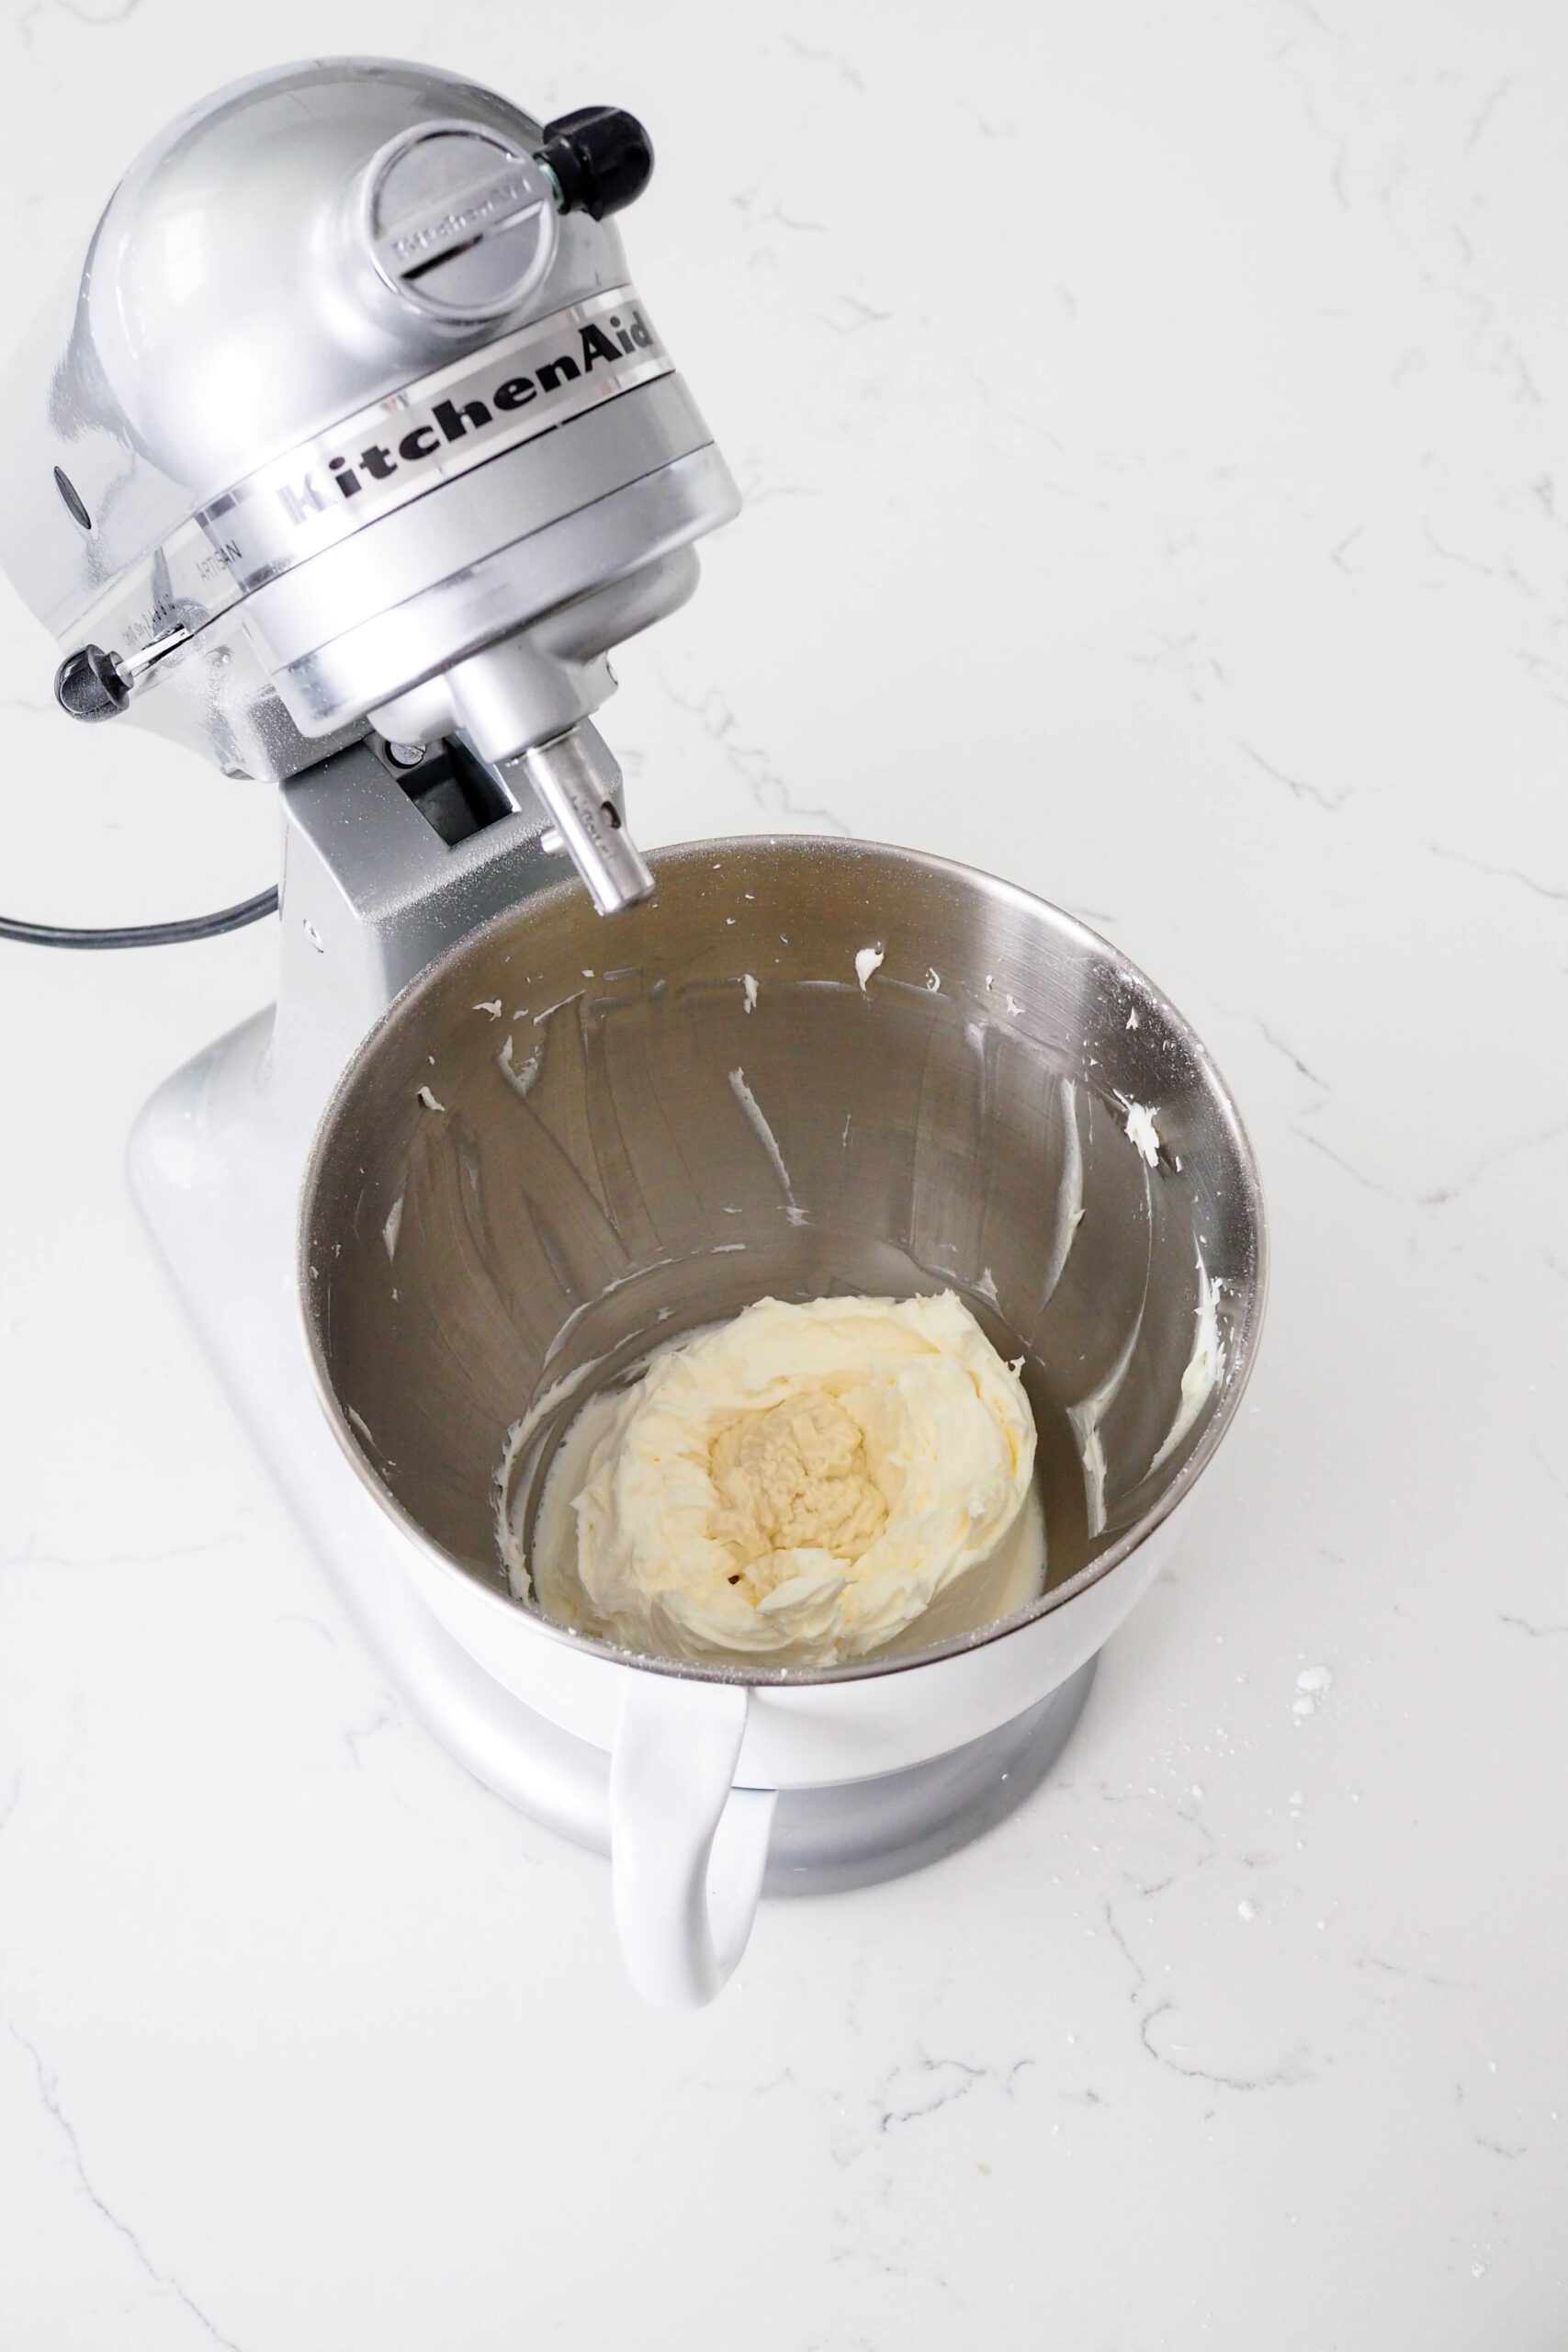 White chocolate is in a well inside of buttercream in a mixer bowl.